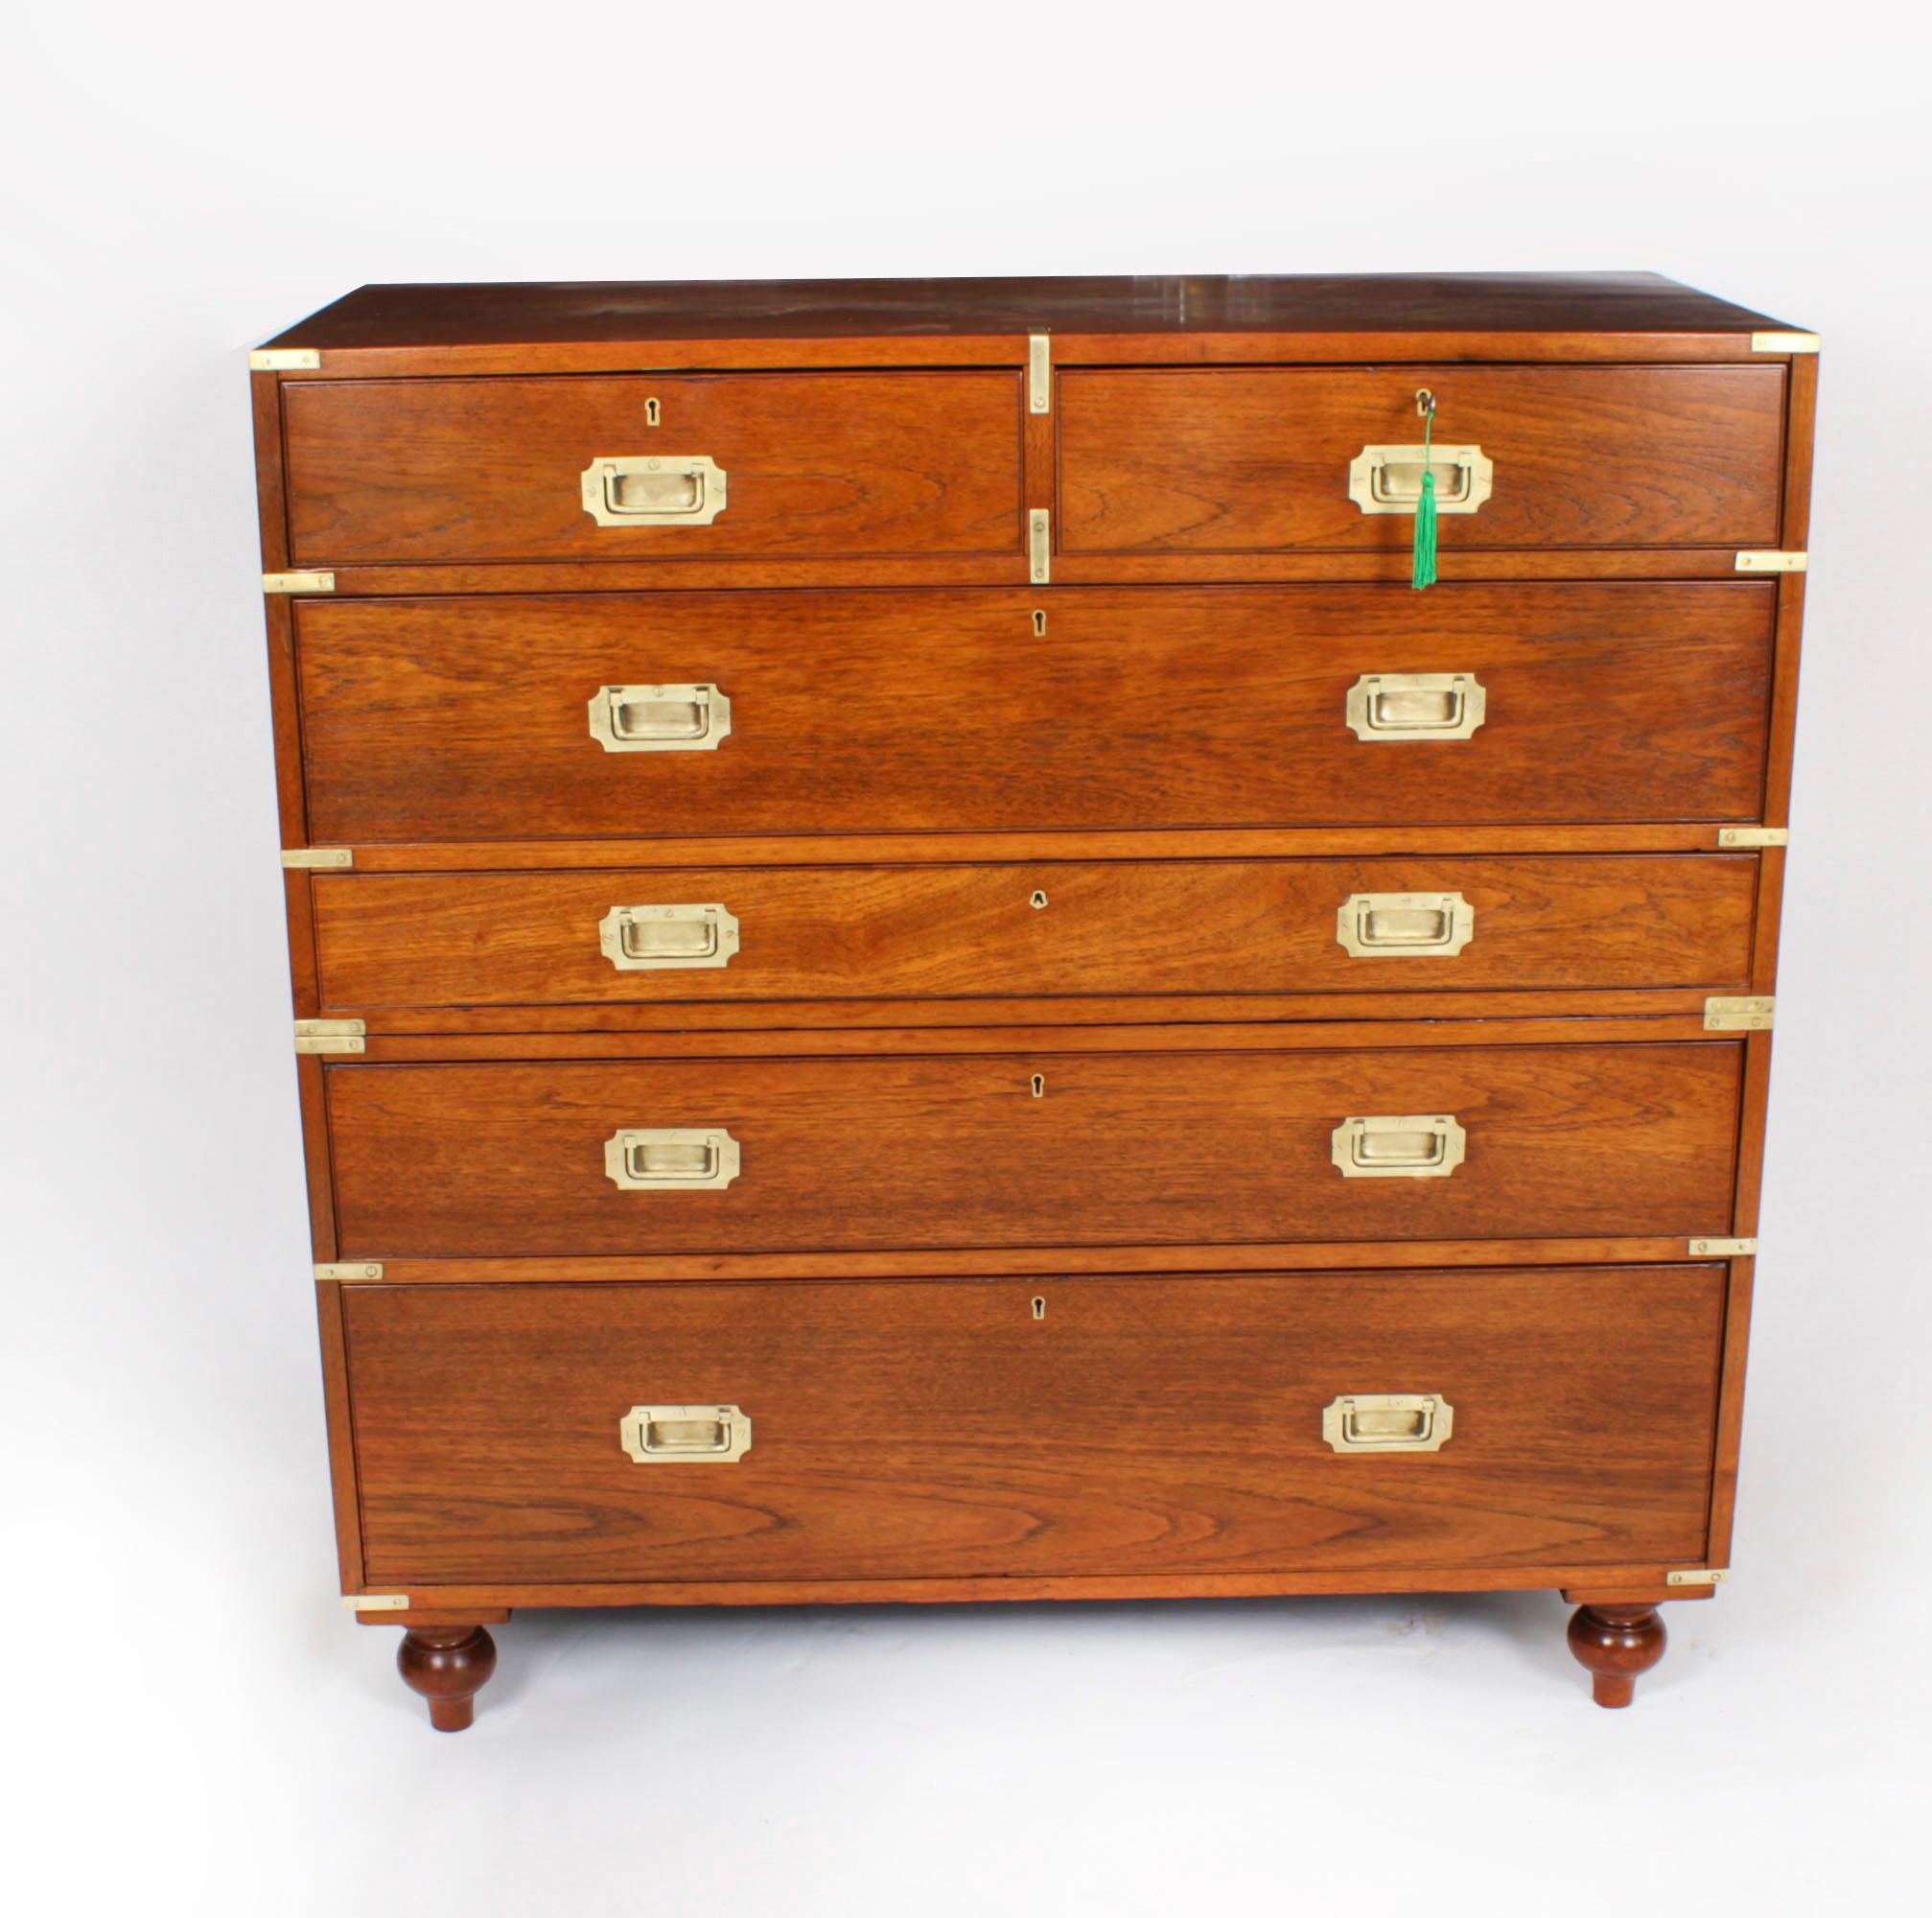 Antique Victorian Military Teak Secretaire Chest of Drawers C1840 19th C For Sale 12